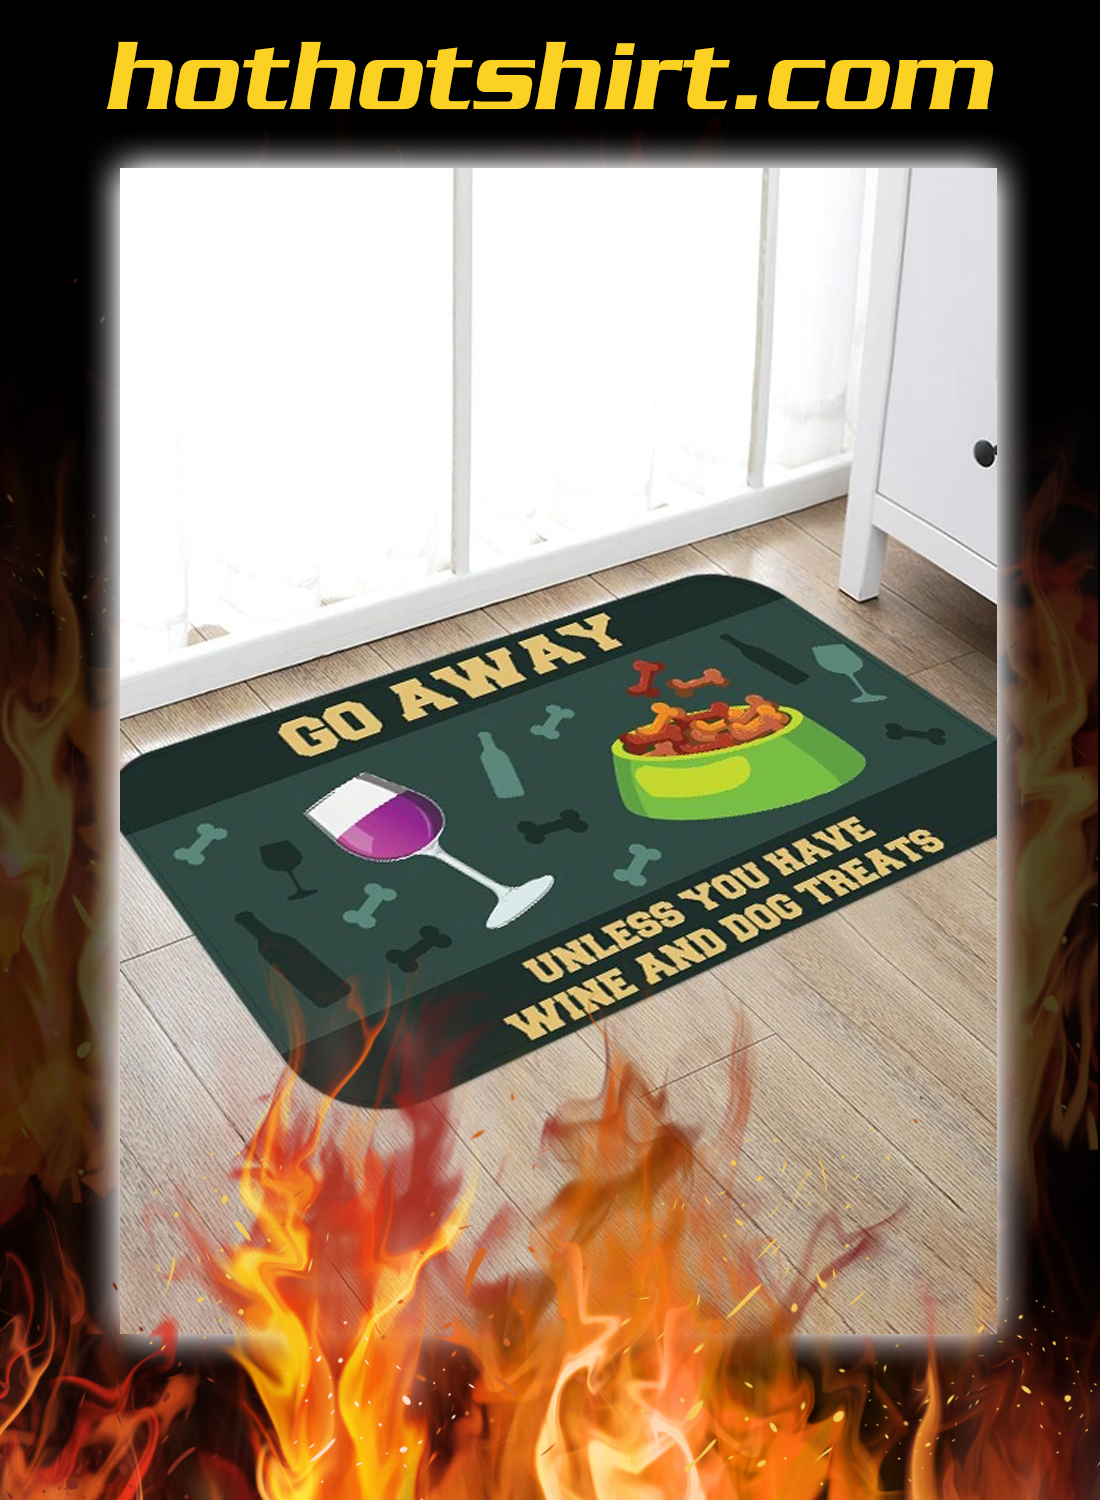 Go away unless you have wine and dog treats doormat 1